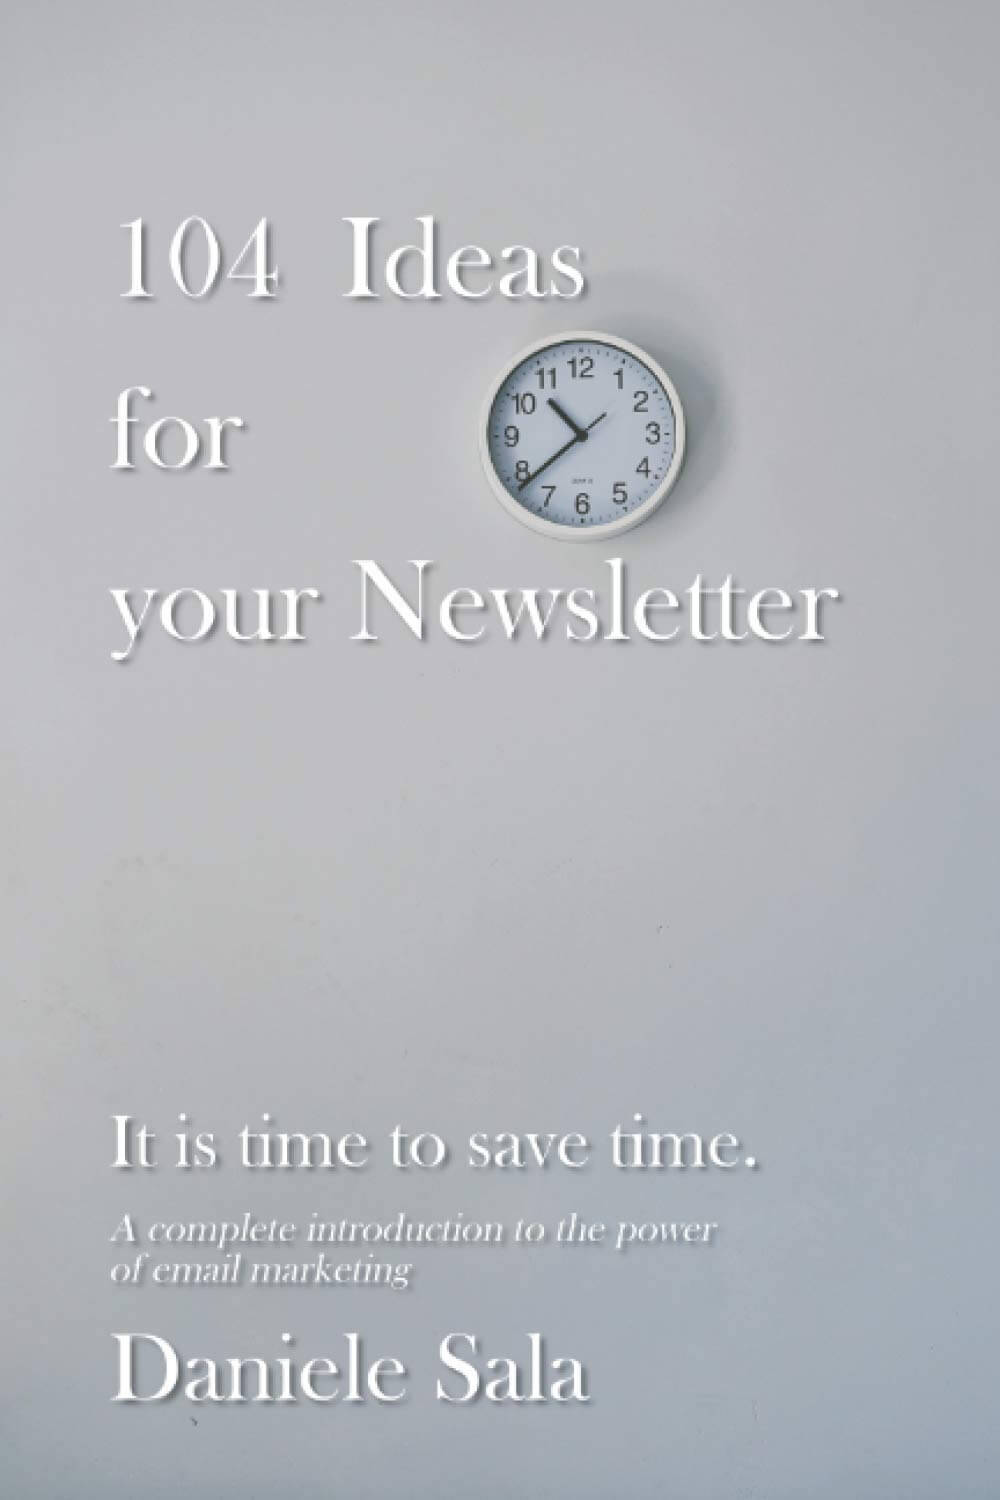 104 IDEAS FOR YOUR NEWSLETTER by Daniele Sala cover